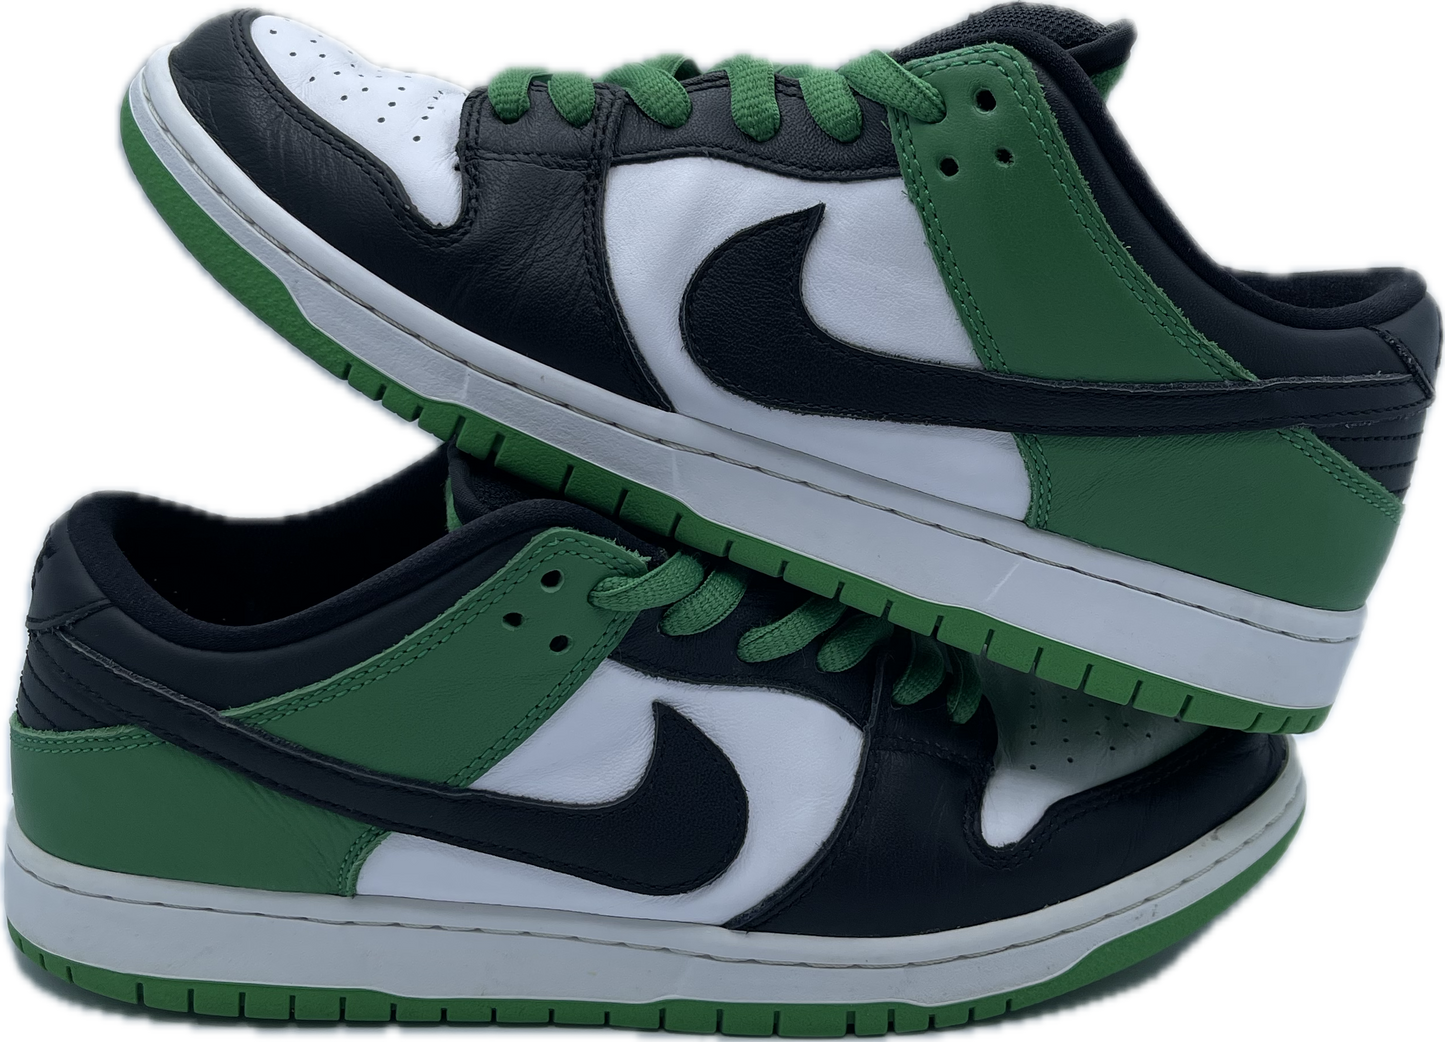 Dunk SB low Classic Green Used